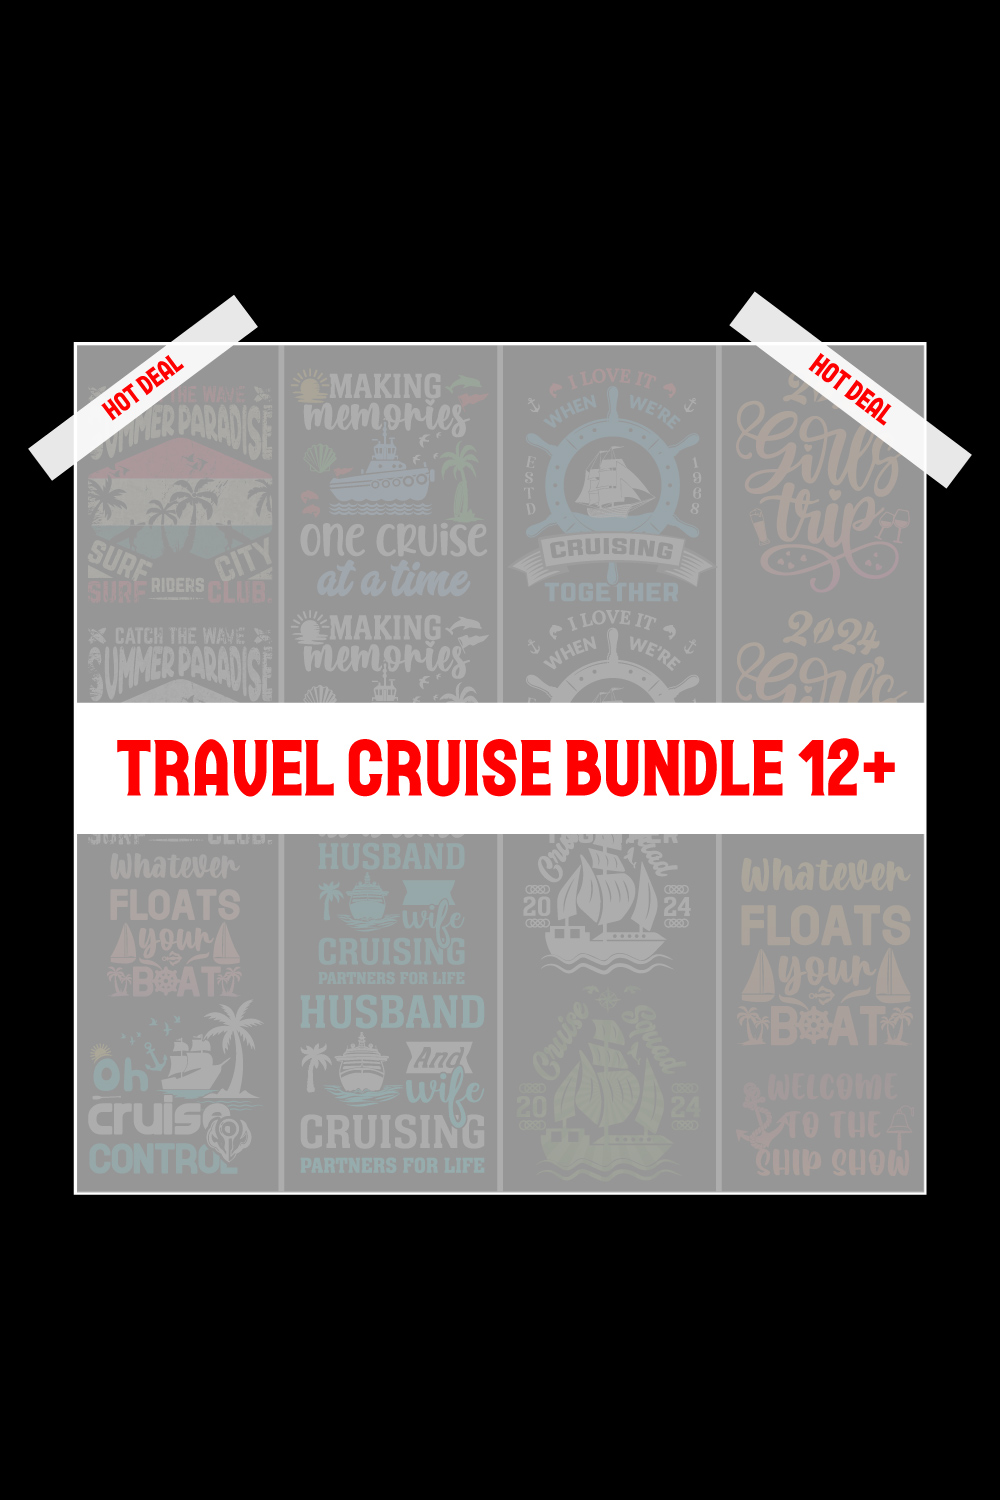 Cruise T-Shirt Design Best Bundle- Cruise T-shirt Design- Travel cruise vector, illustration, silhouette, or graphics pinterest preview image.